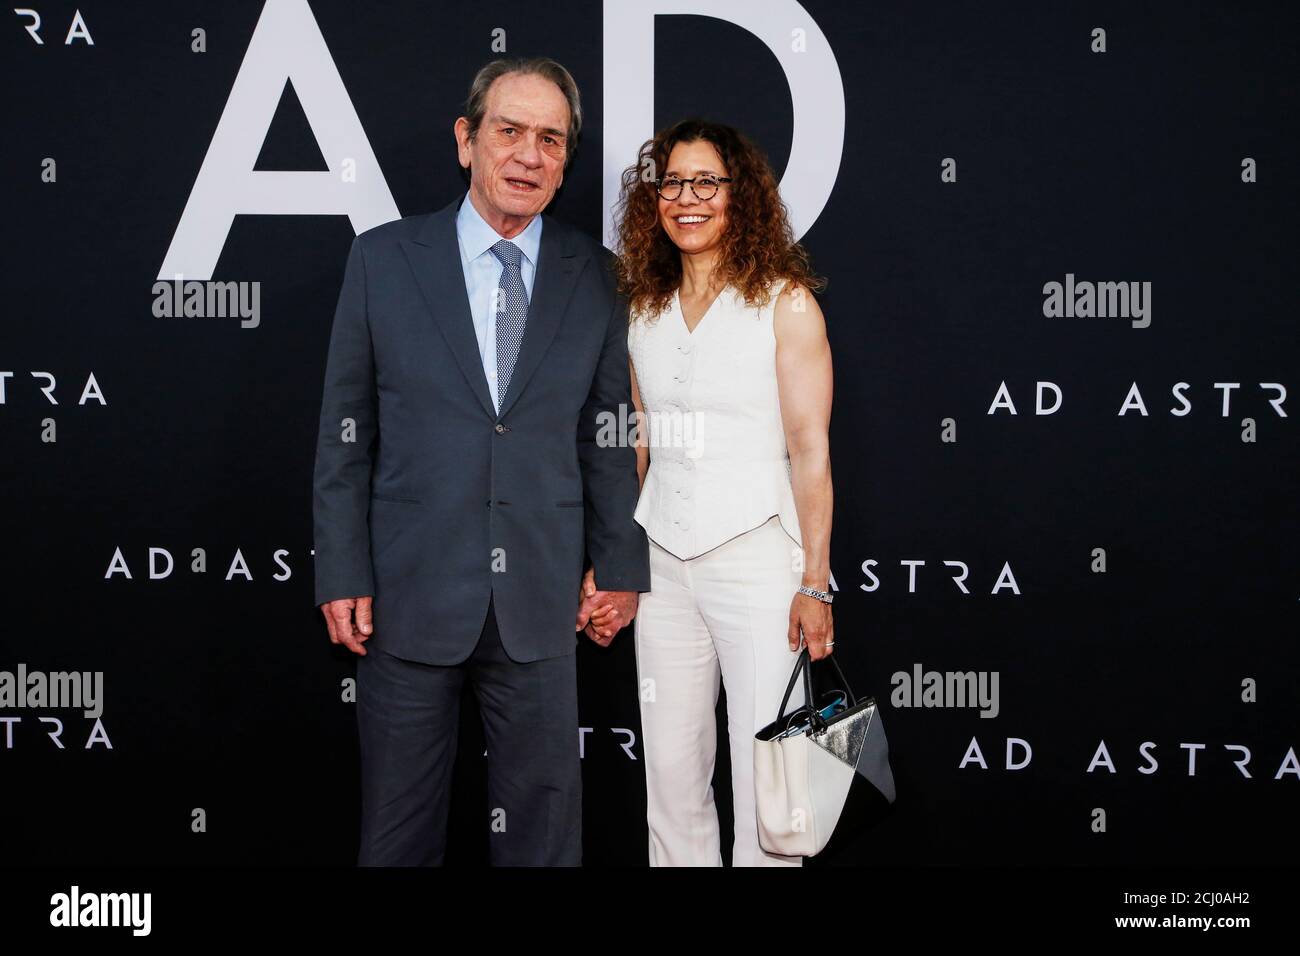 Cast member Tommy Lee Jones and his wife Dawn Laurel-Jones attend the  premiere for the film "Ad Astra" in Los Angeles, California, U.S.,  September 18, 2019. REUTERS/Mario Anzuoni Stock Photo - Alamy